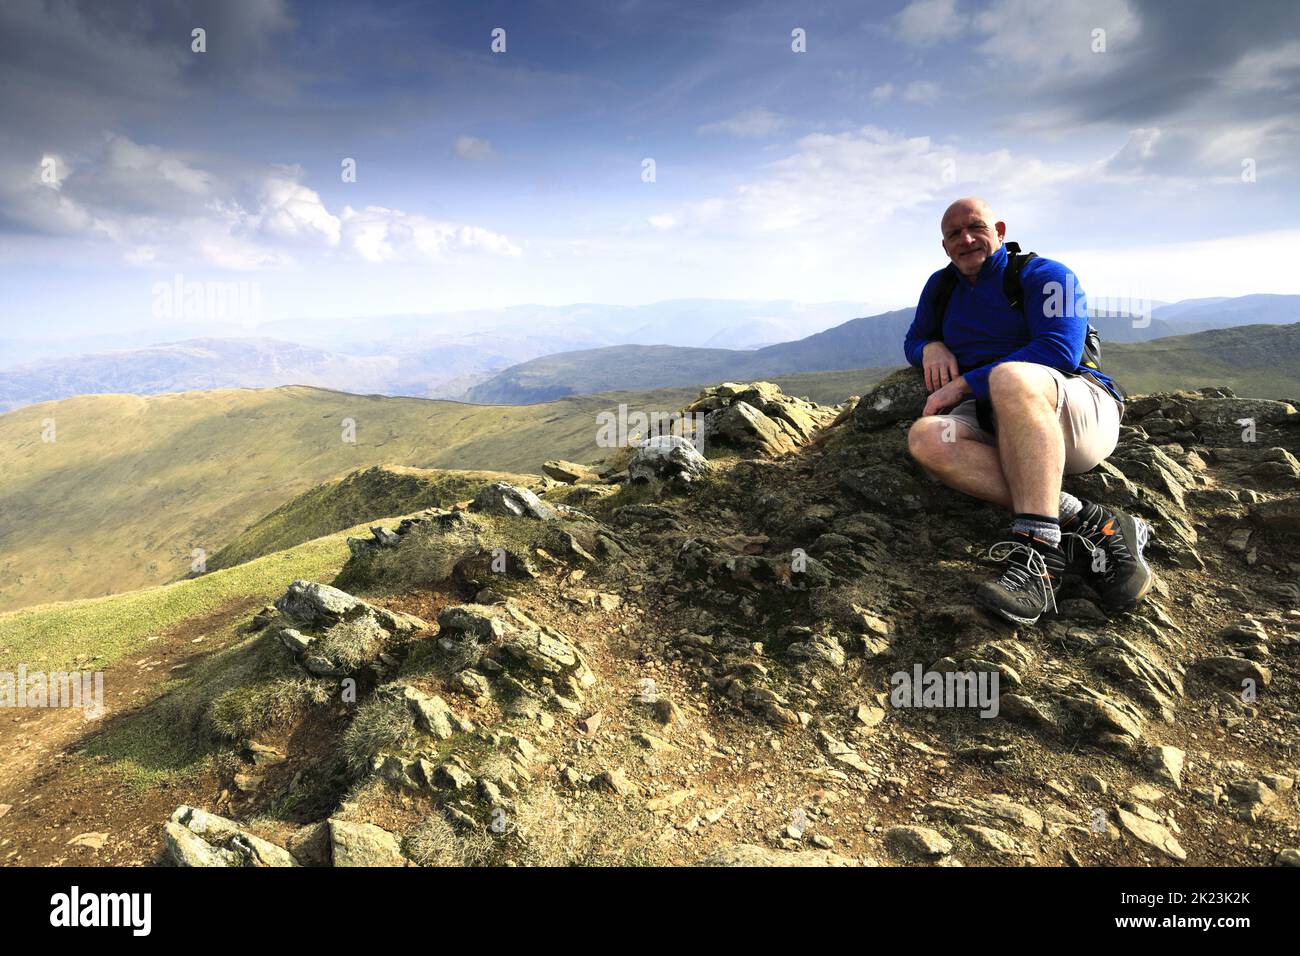 Walker at the summit of Catstye Cam fell, Lake District National Park, Cumbria, England, UK Catstye Cam fells is one of the 214 Wainwright fells. Stock Photo